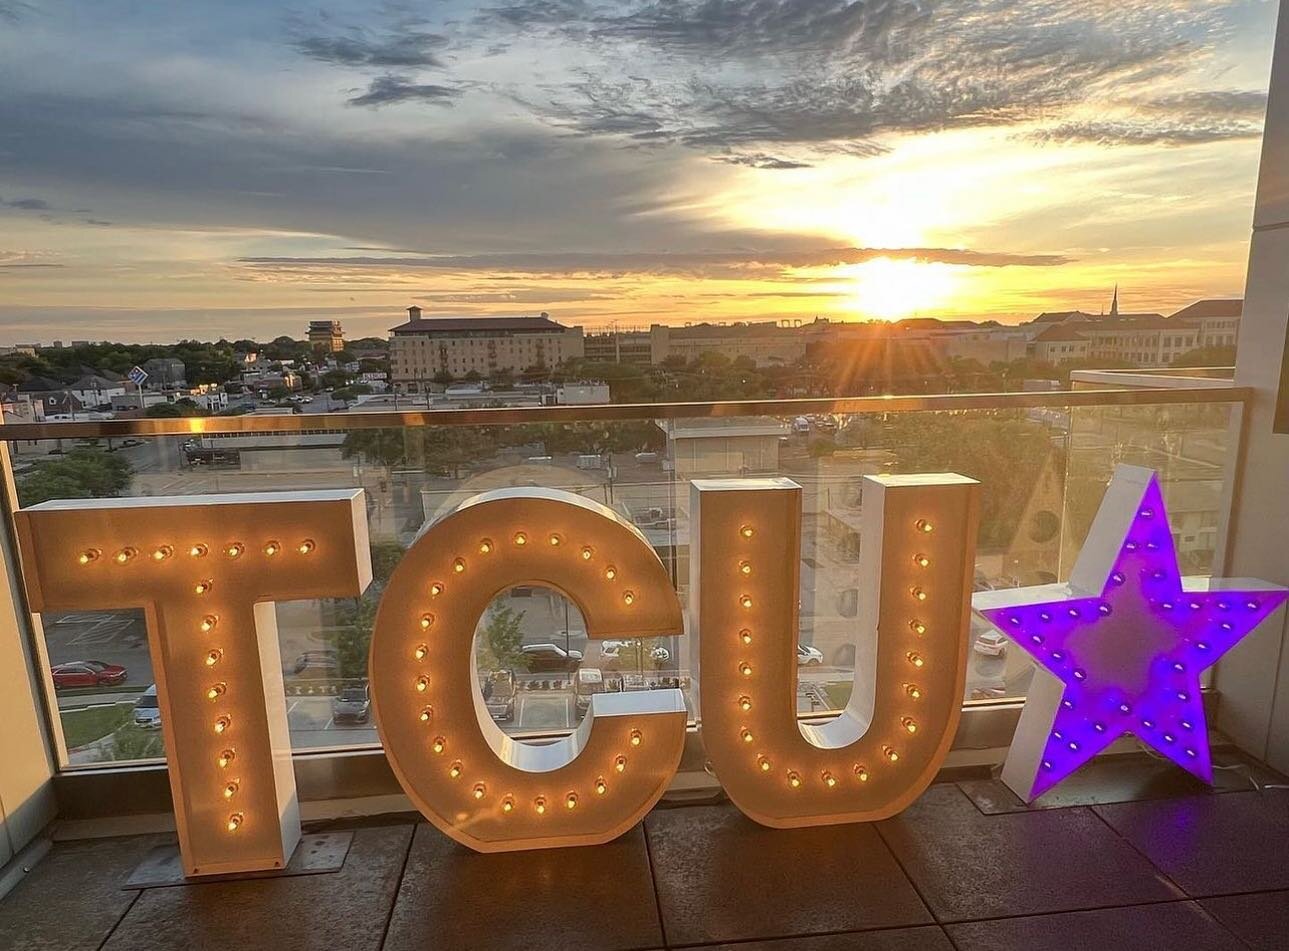 Still can&rsquo;t get over graduation last weekend! 🎓 Thank you to everyone who came and celebrated on the rooftop, and congrats again to the new grads!! 🐸💜

Don&rsquo;t forget to book your next event or celebration with us!! 

📸: @dtongish